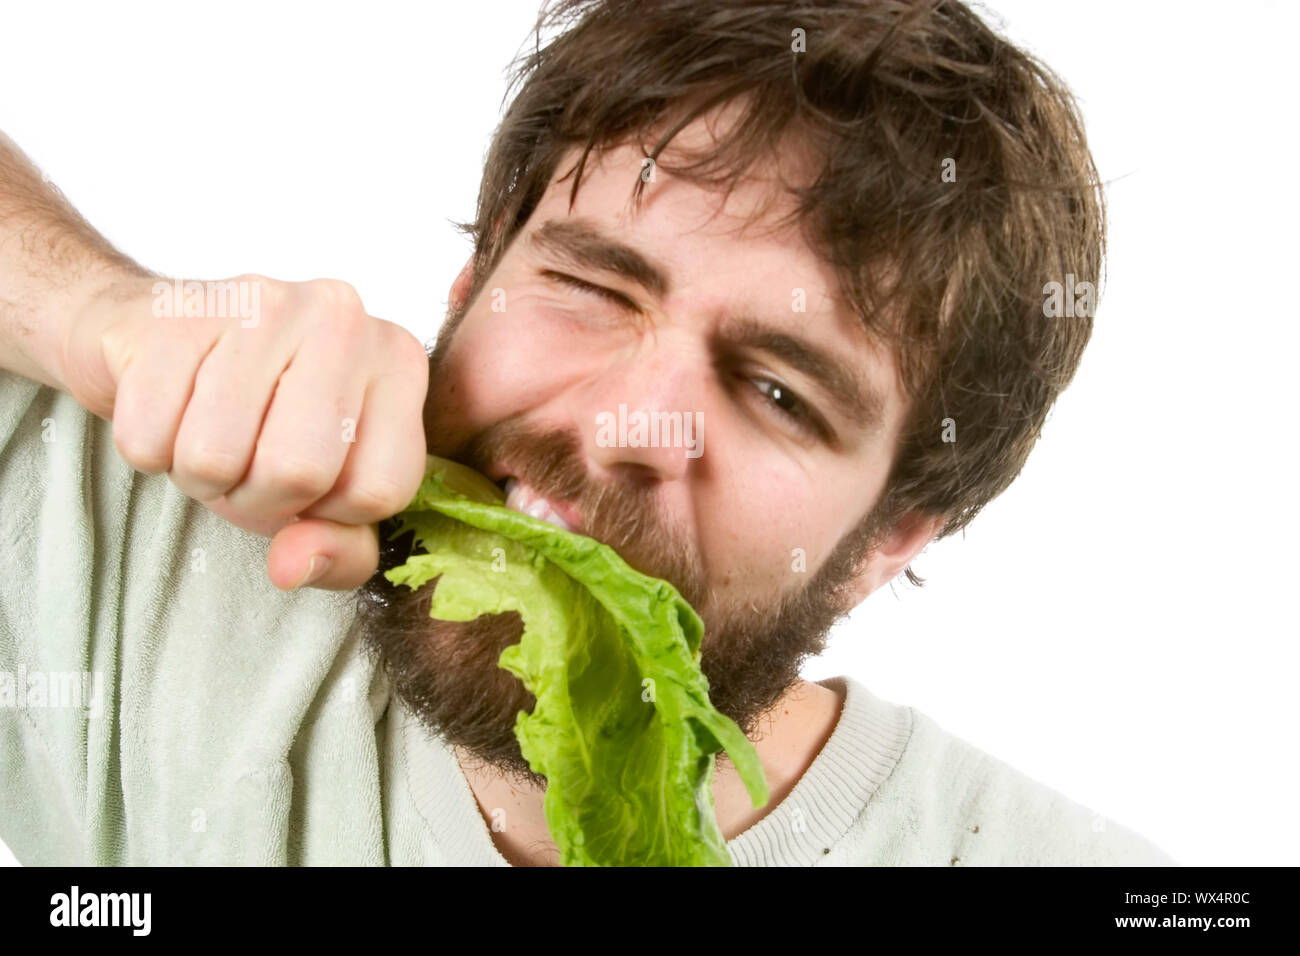 A young male with a beard is eagerly eating salad, as if he were a barbarian eating meat. Stock Photo